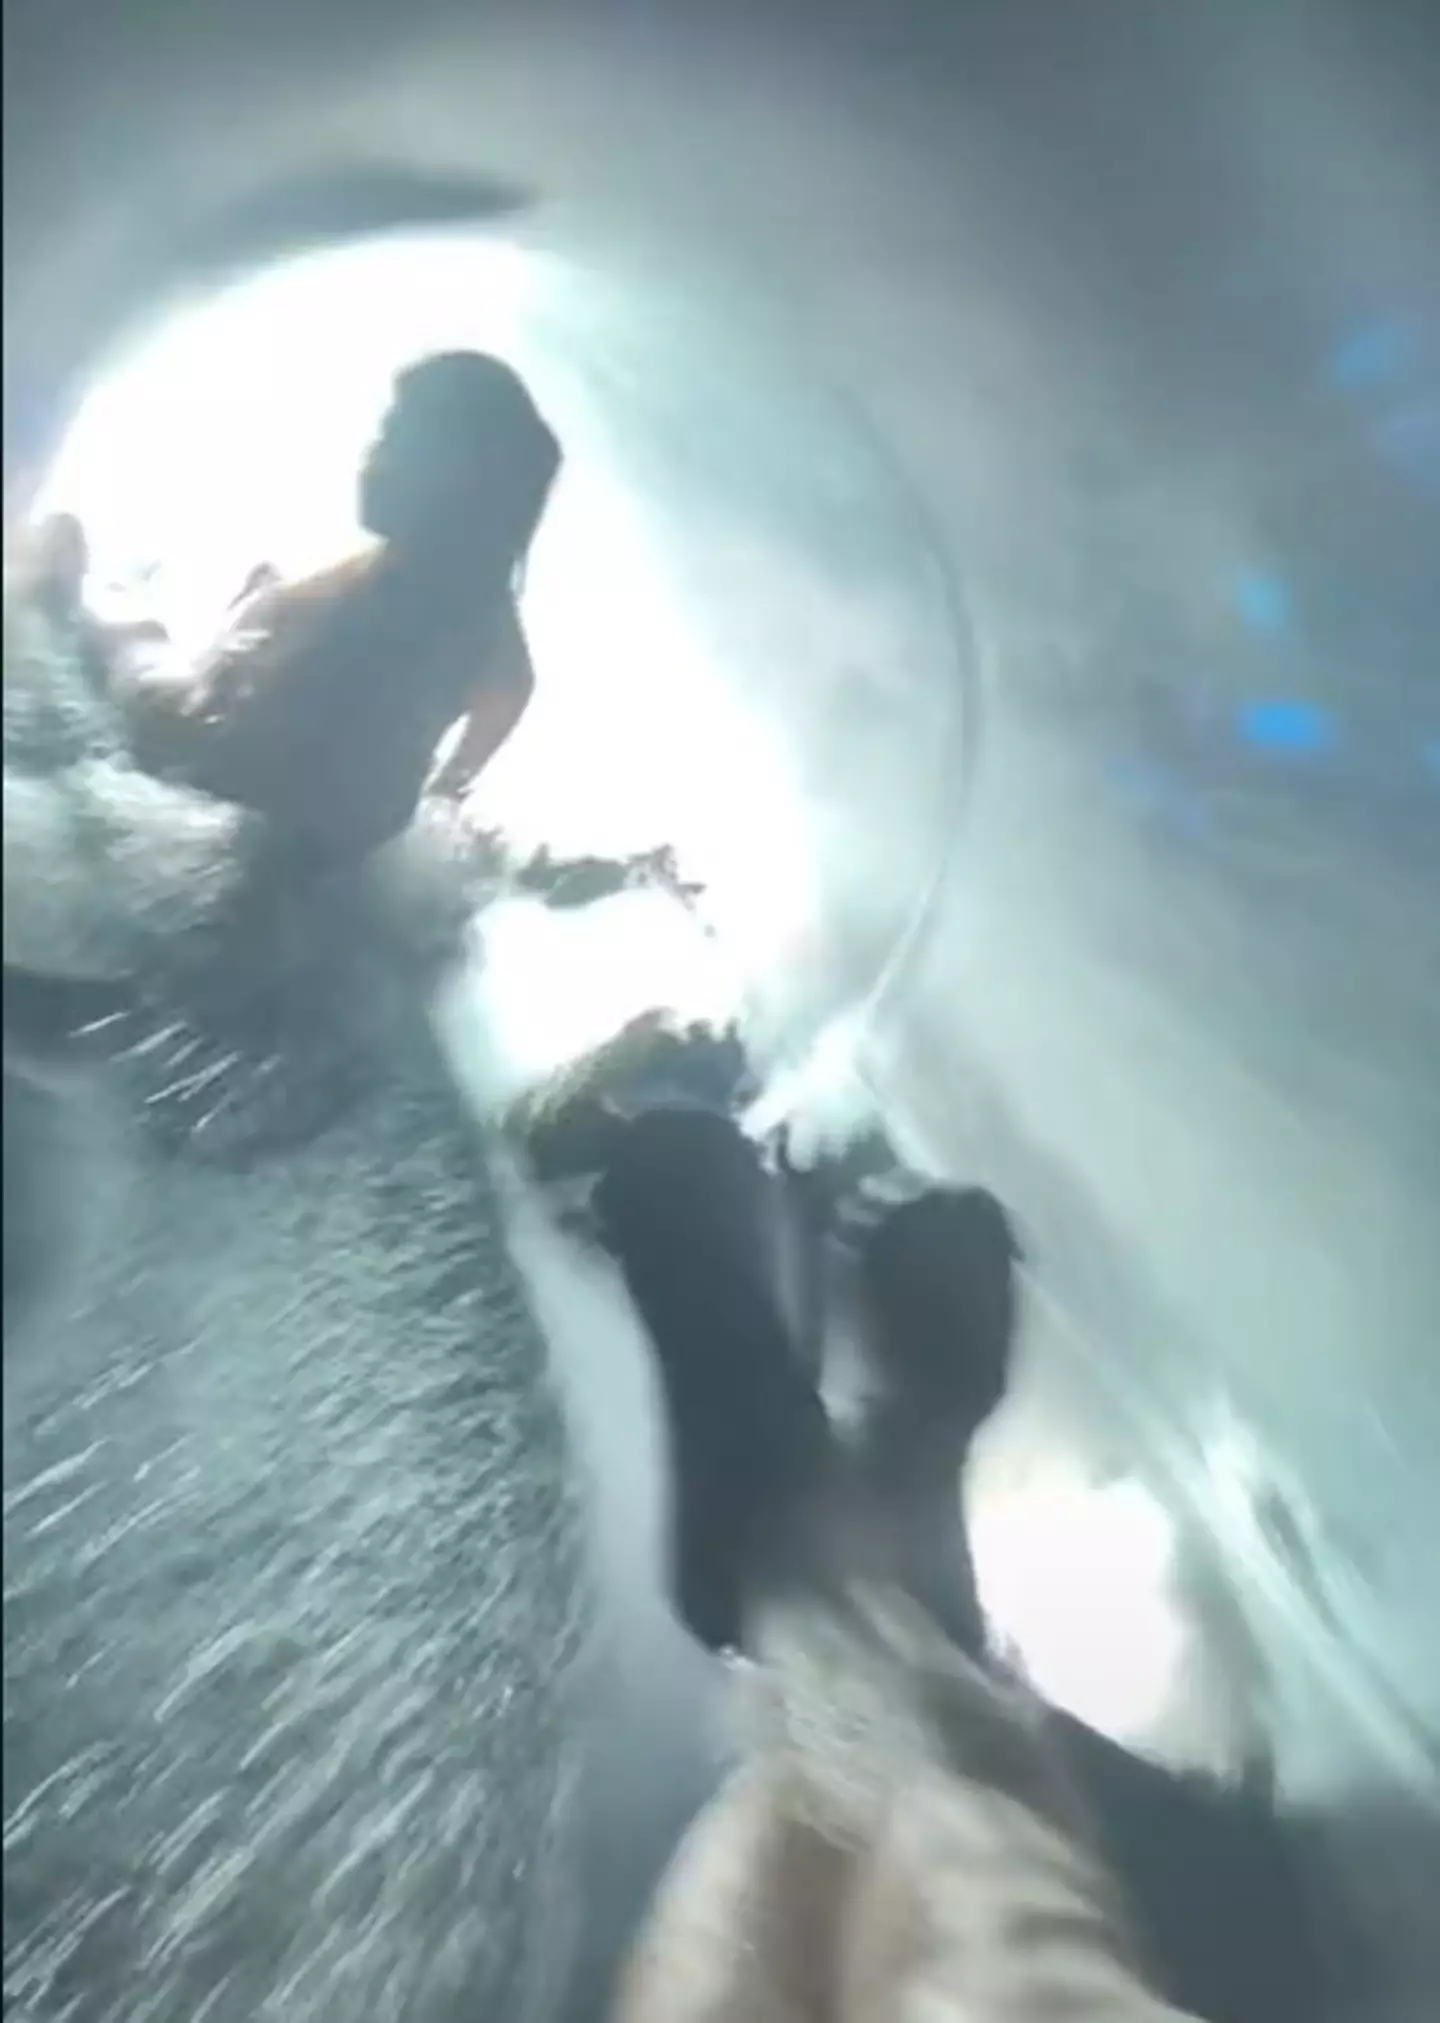 The filmer accidentally collided with a girl at the bottom of the slide.